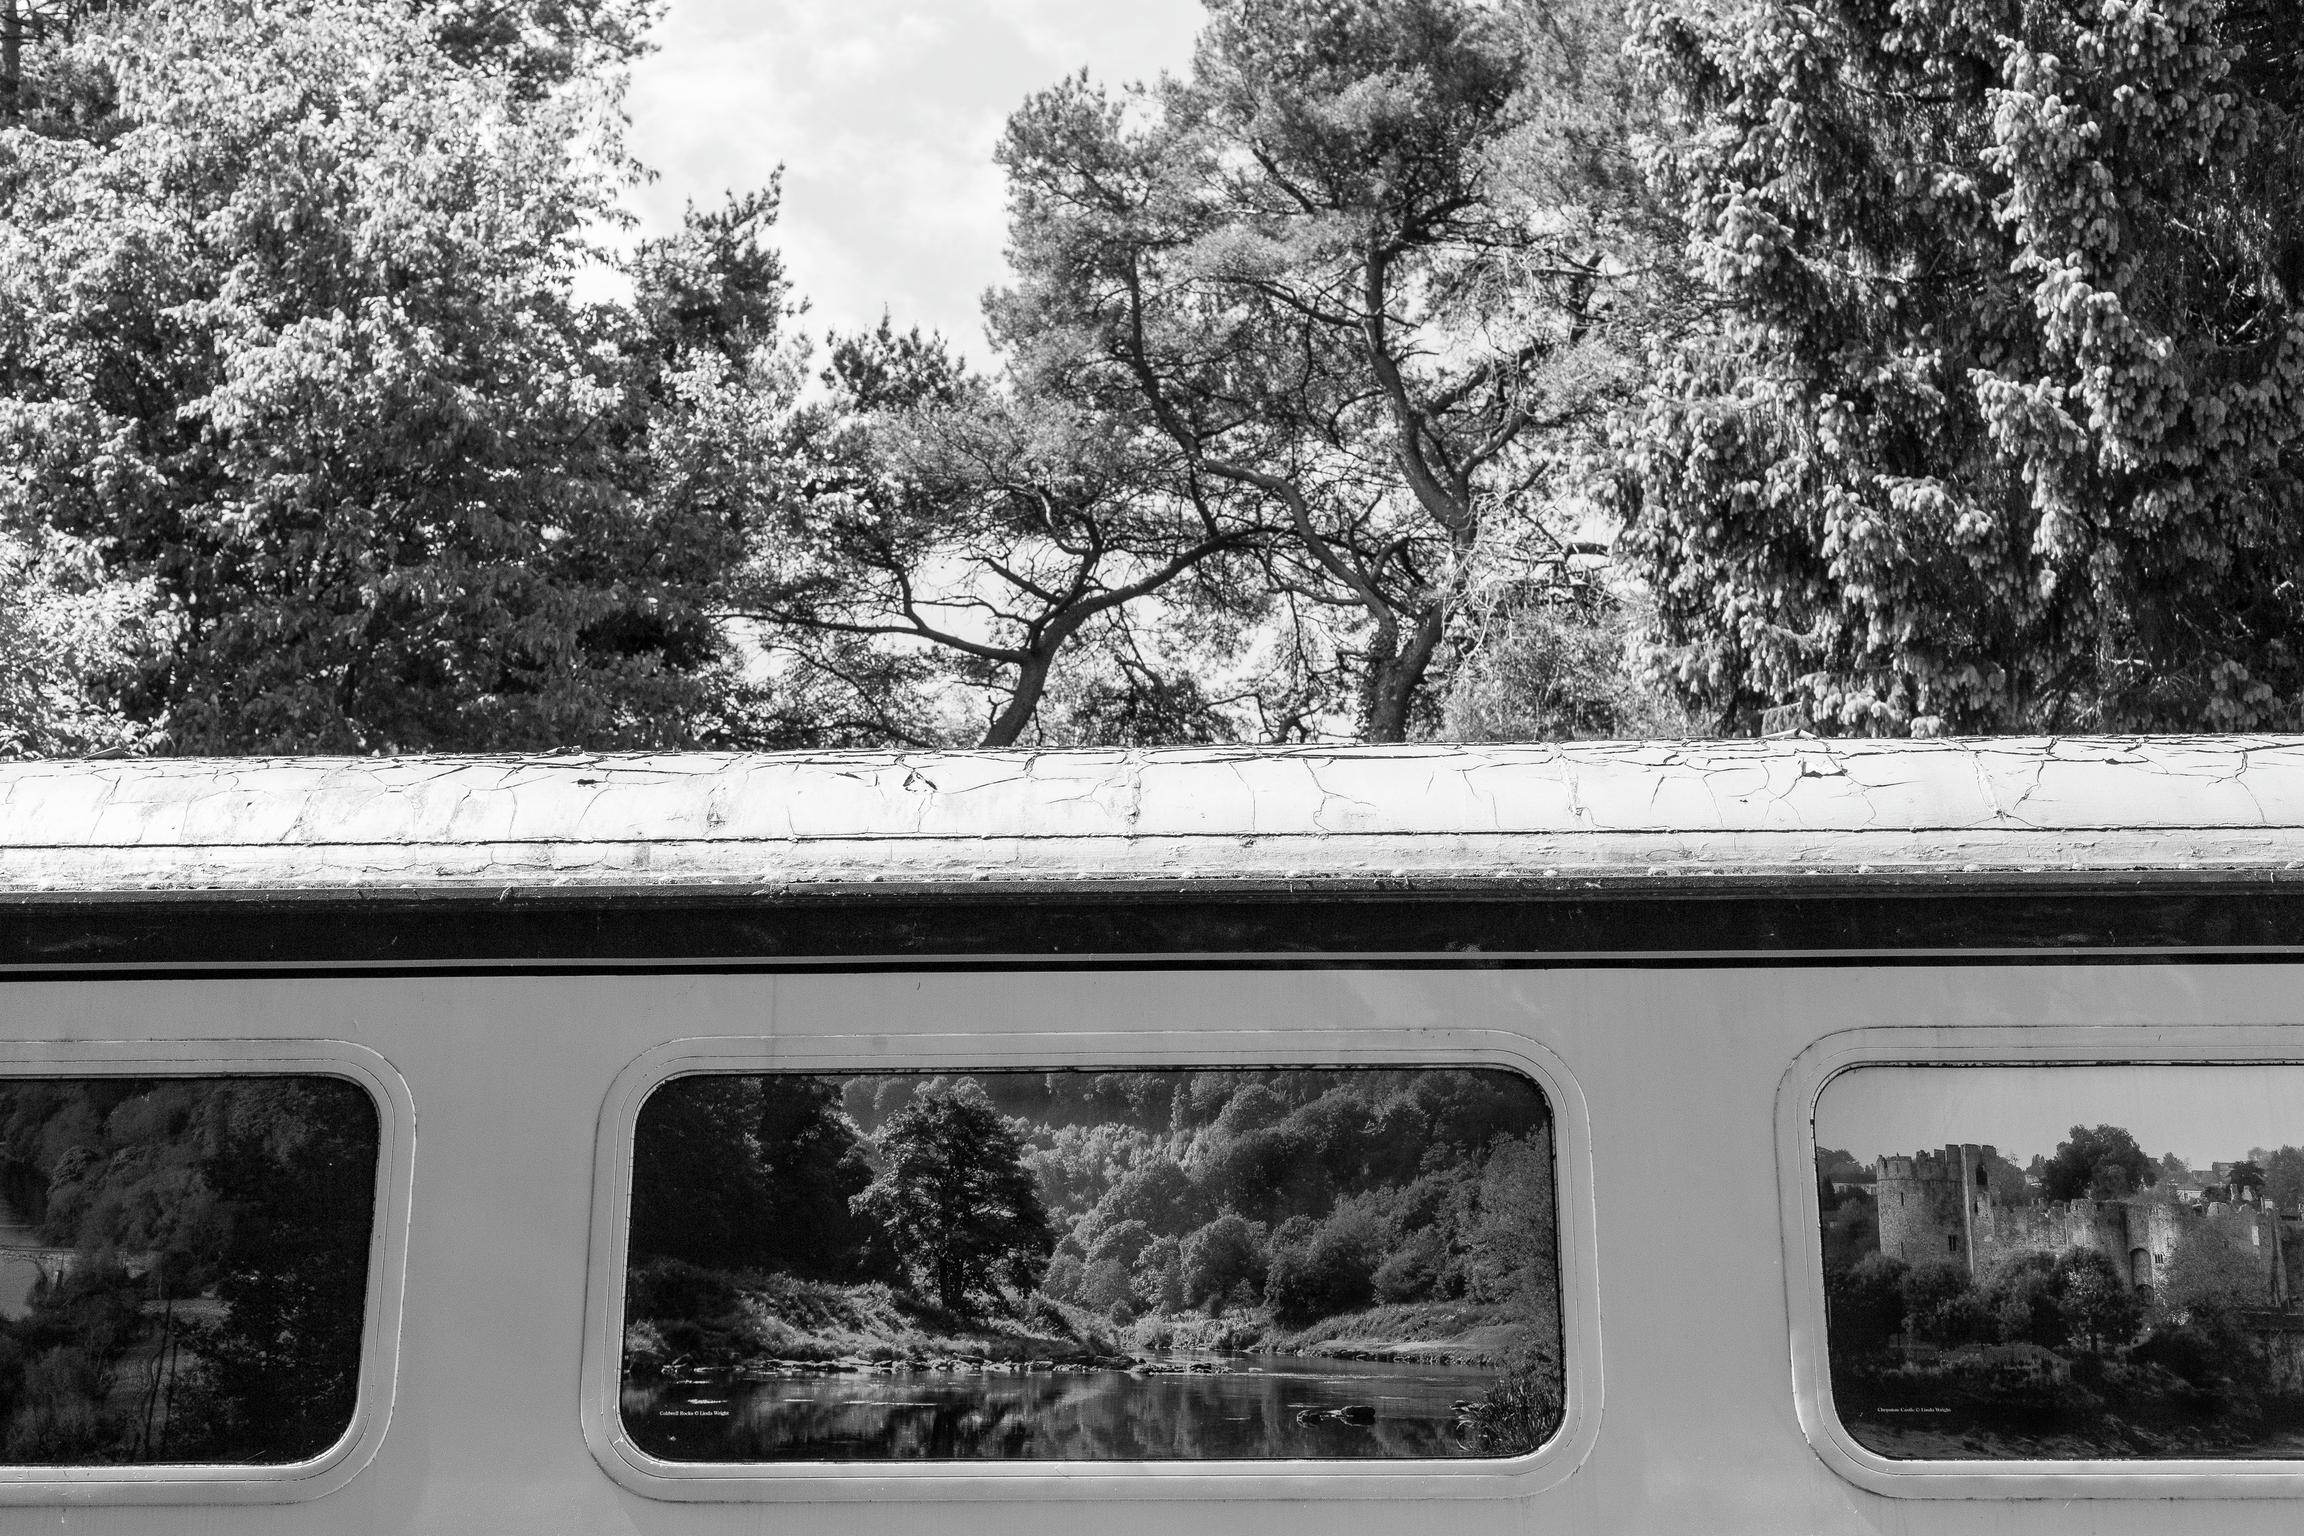 Train carriage, Old Station. Tintern, Wales